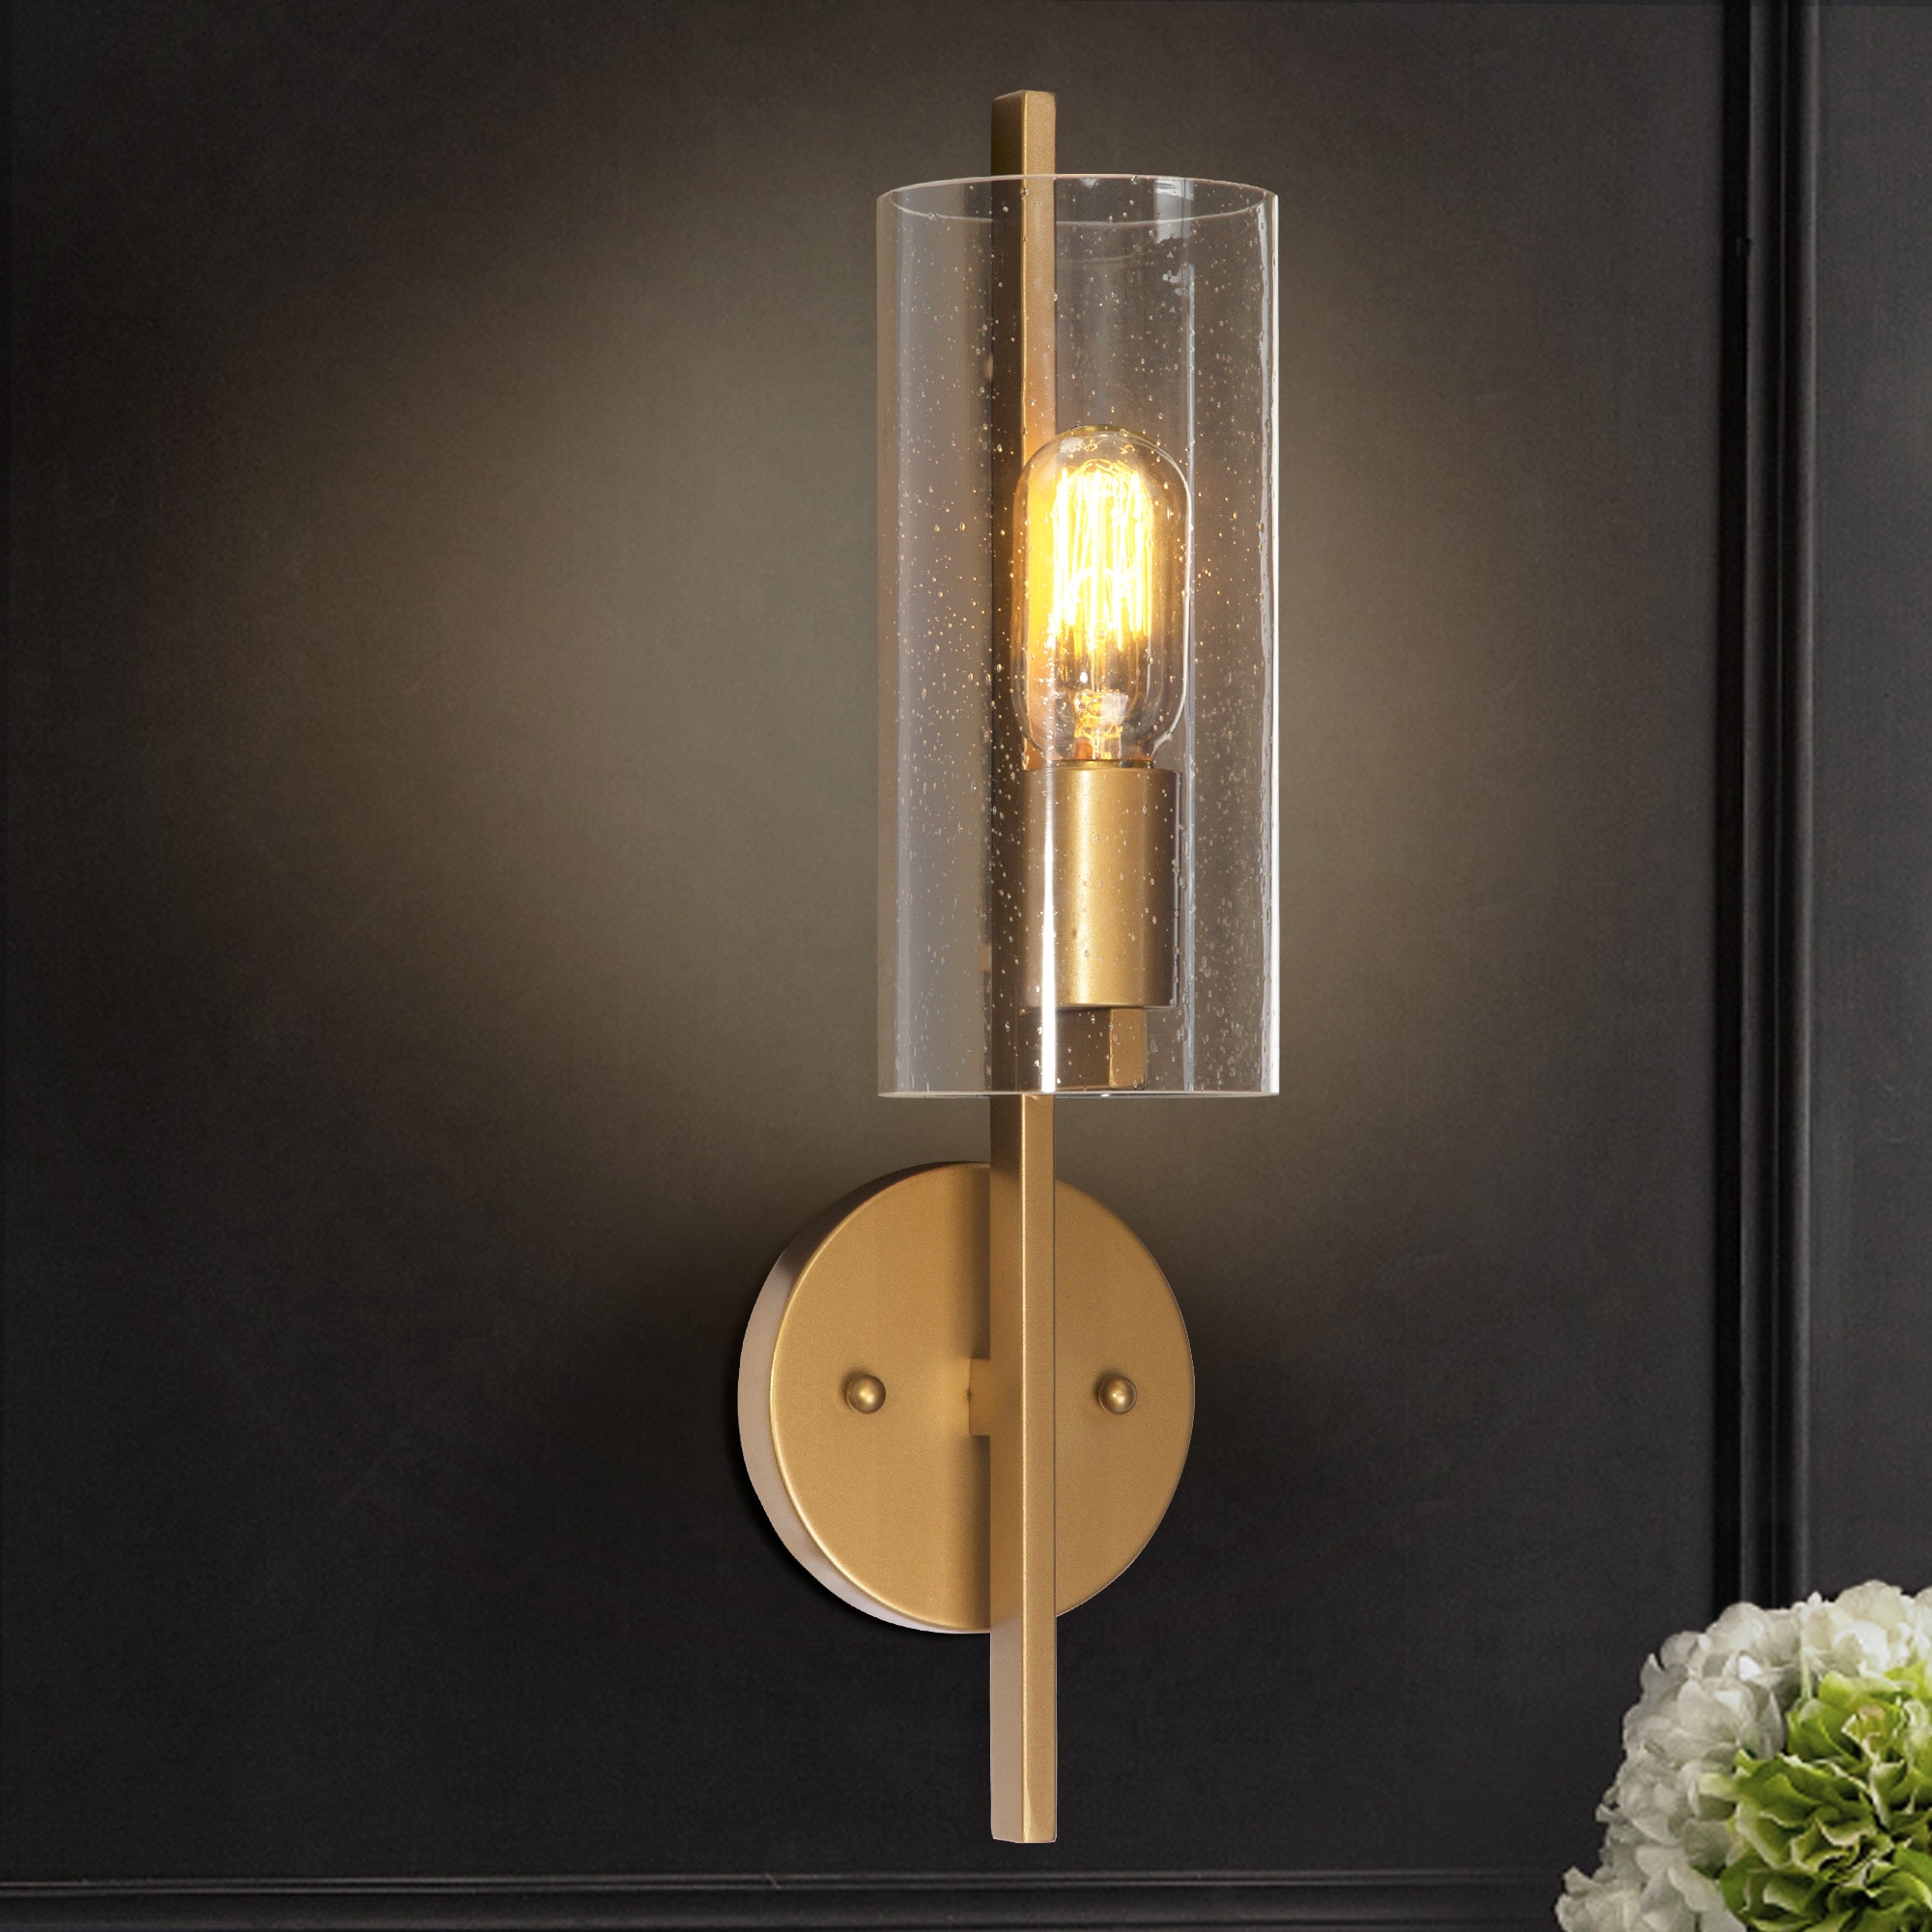 Glass wall light industrial seeded glass wall sconce bathroom vanity light